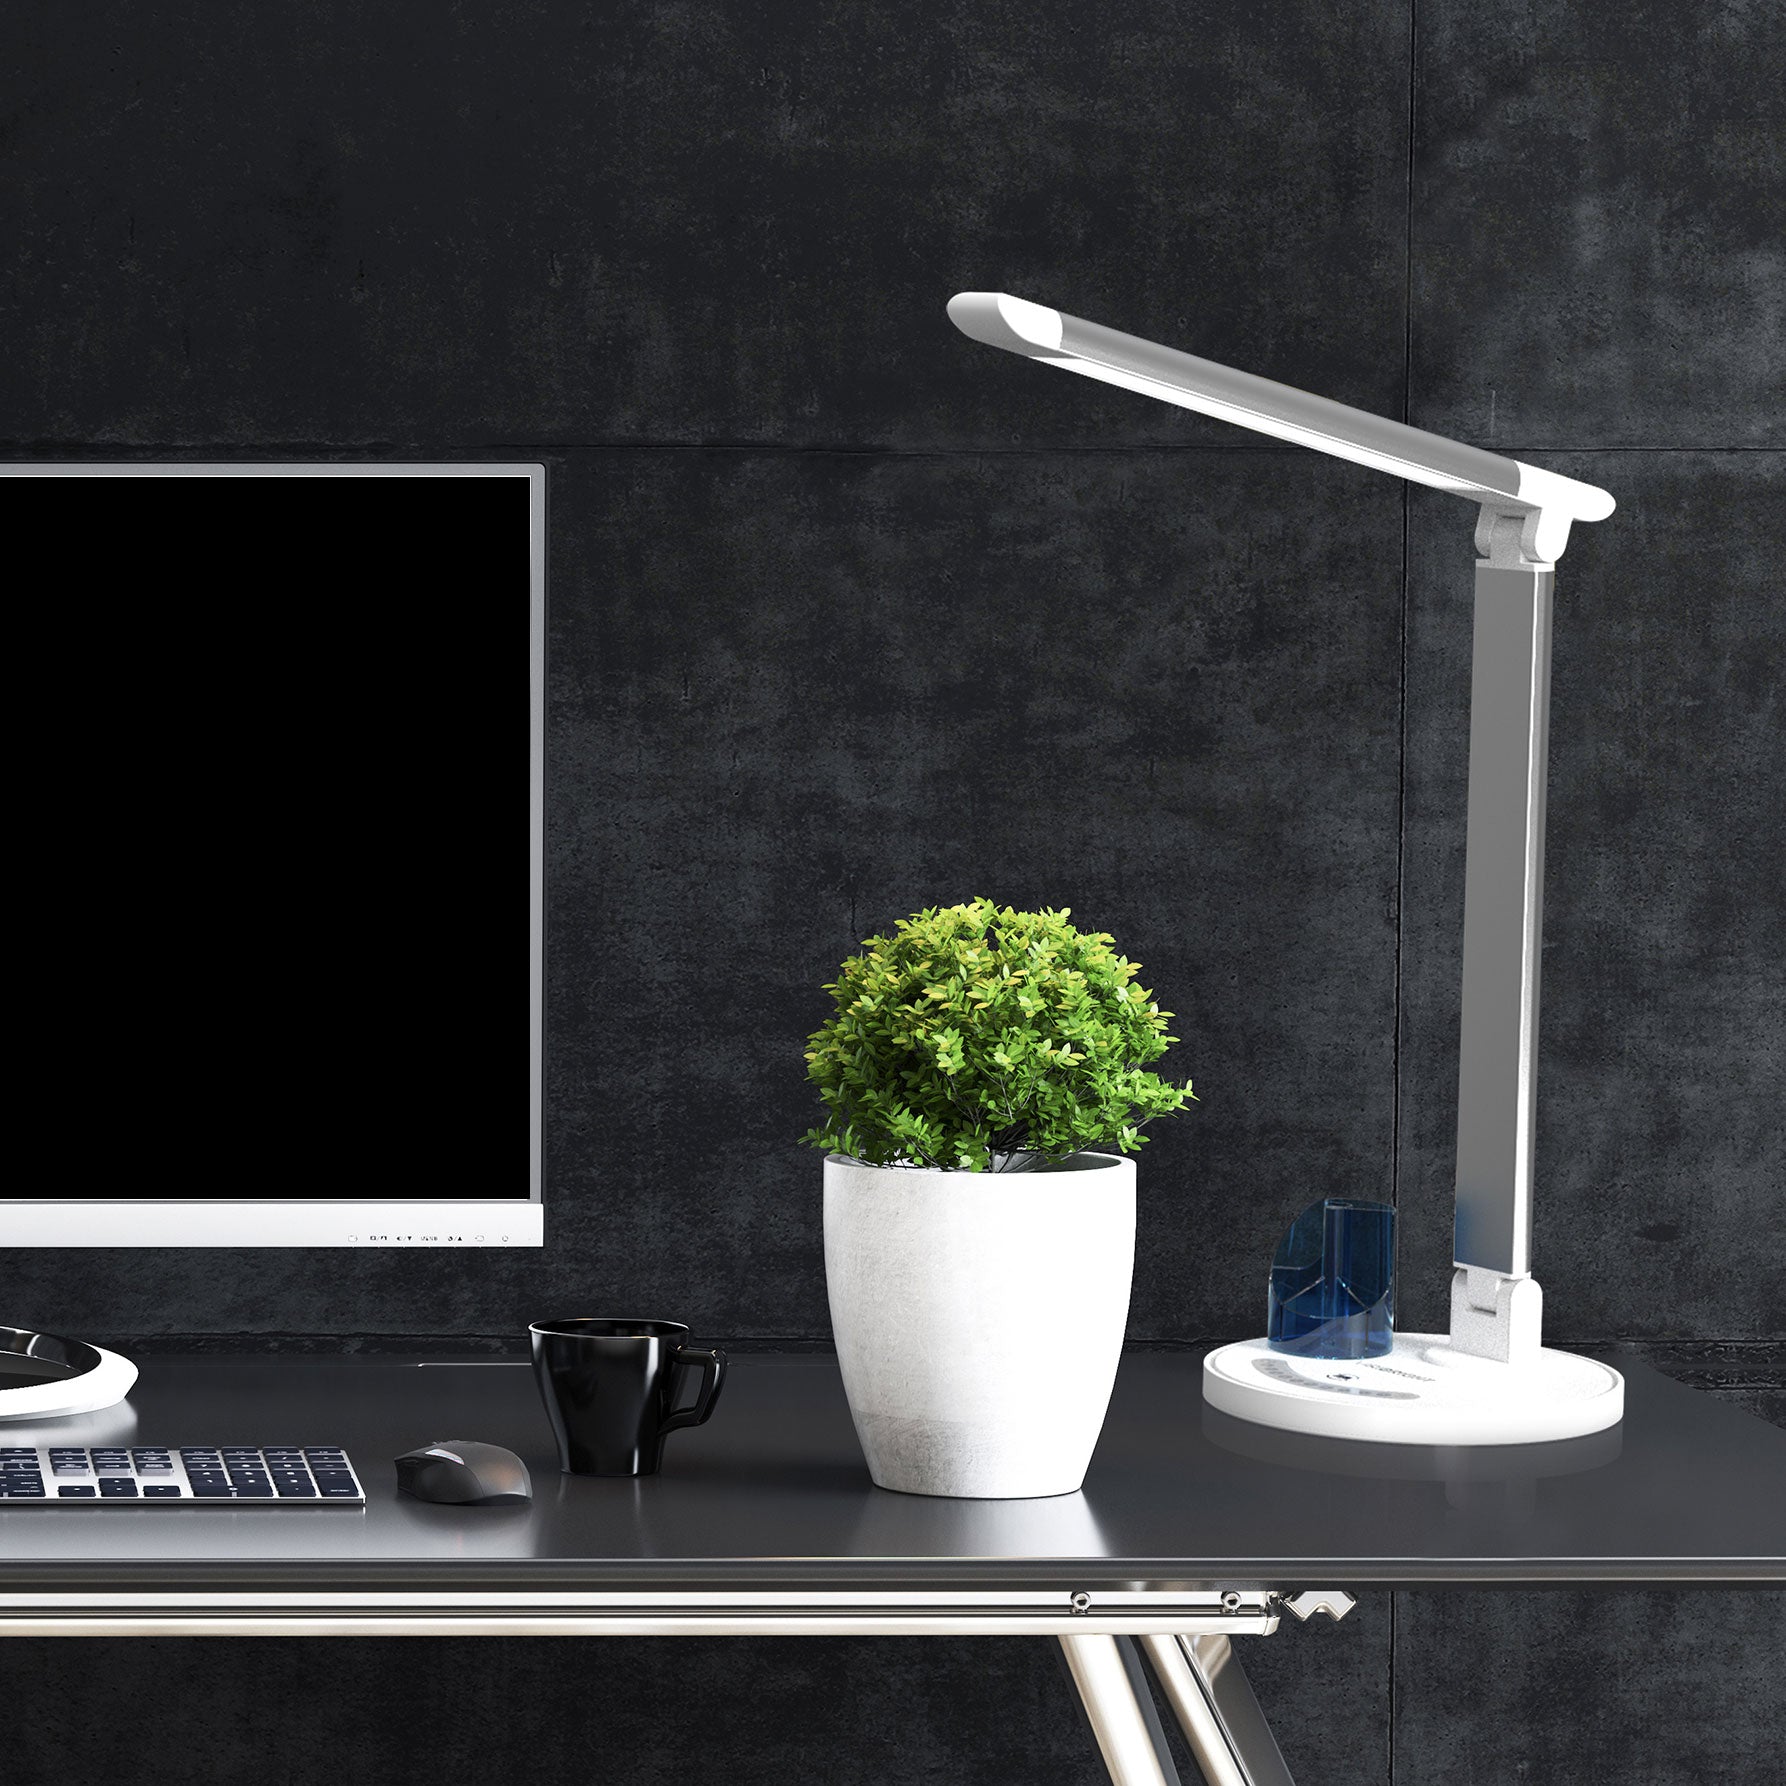 Viribright Modern LED Desk Lamp with Touch Controls & USB Charge Port